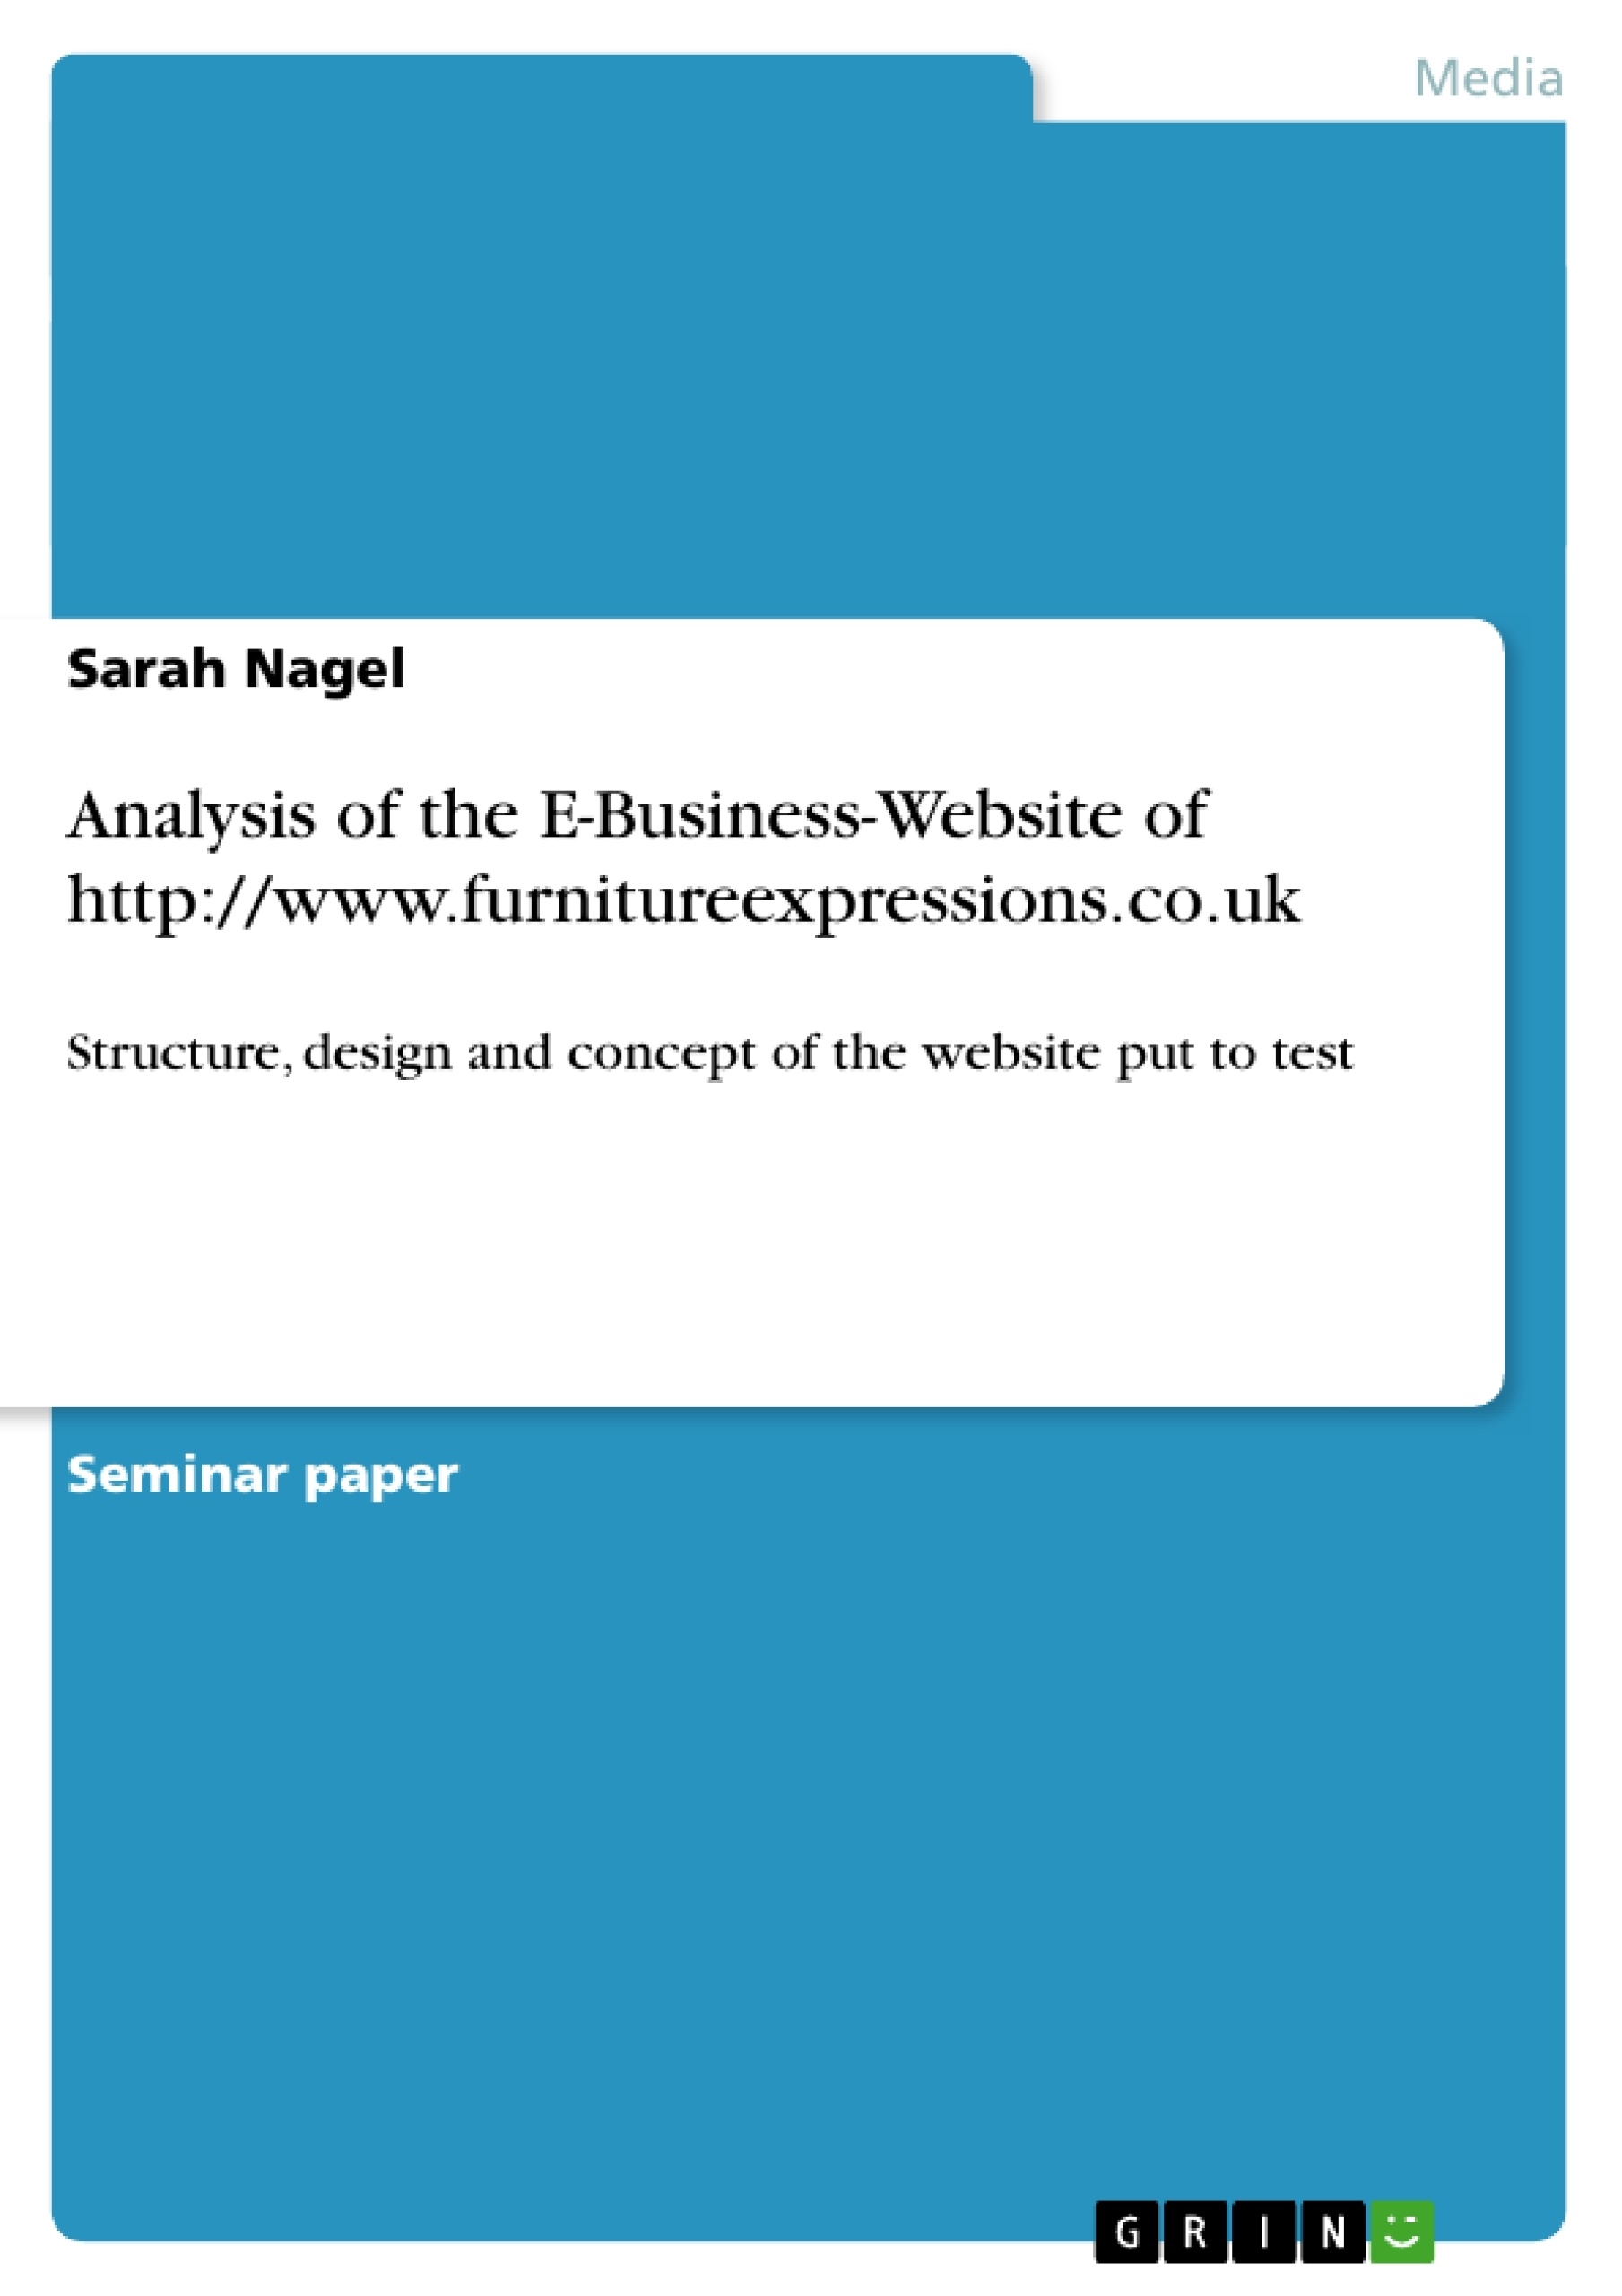 Titre: Analysis of the E-Business-Website of http://www.furnitureexpressions.co.uk